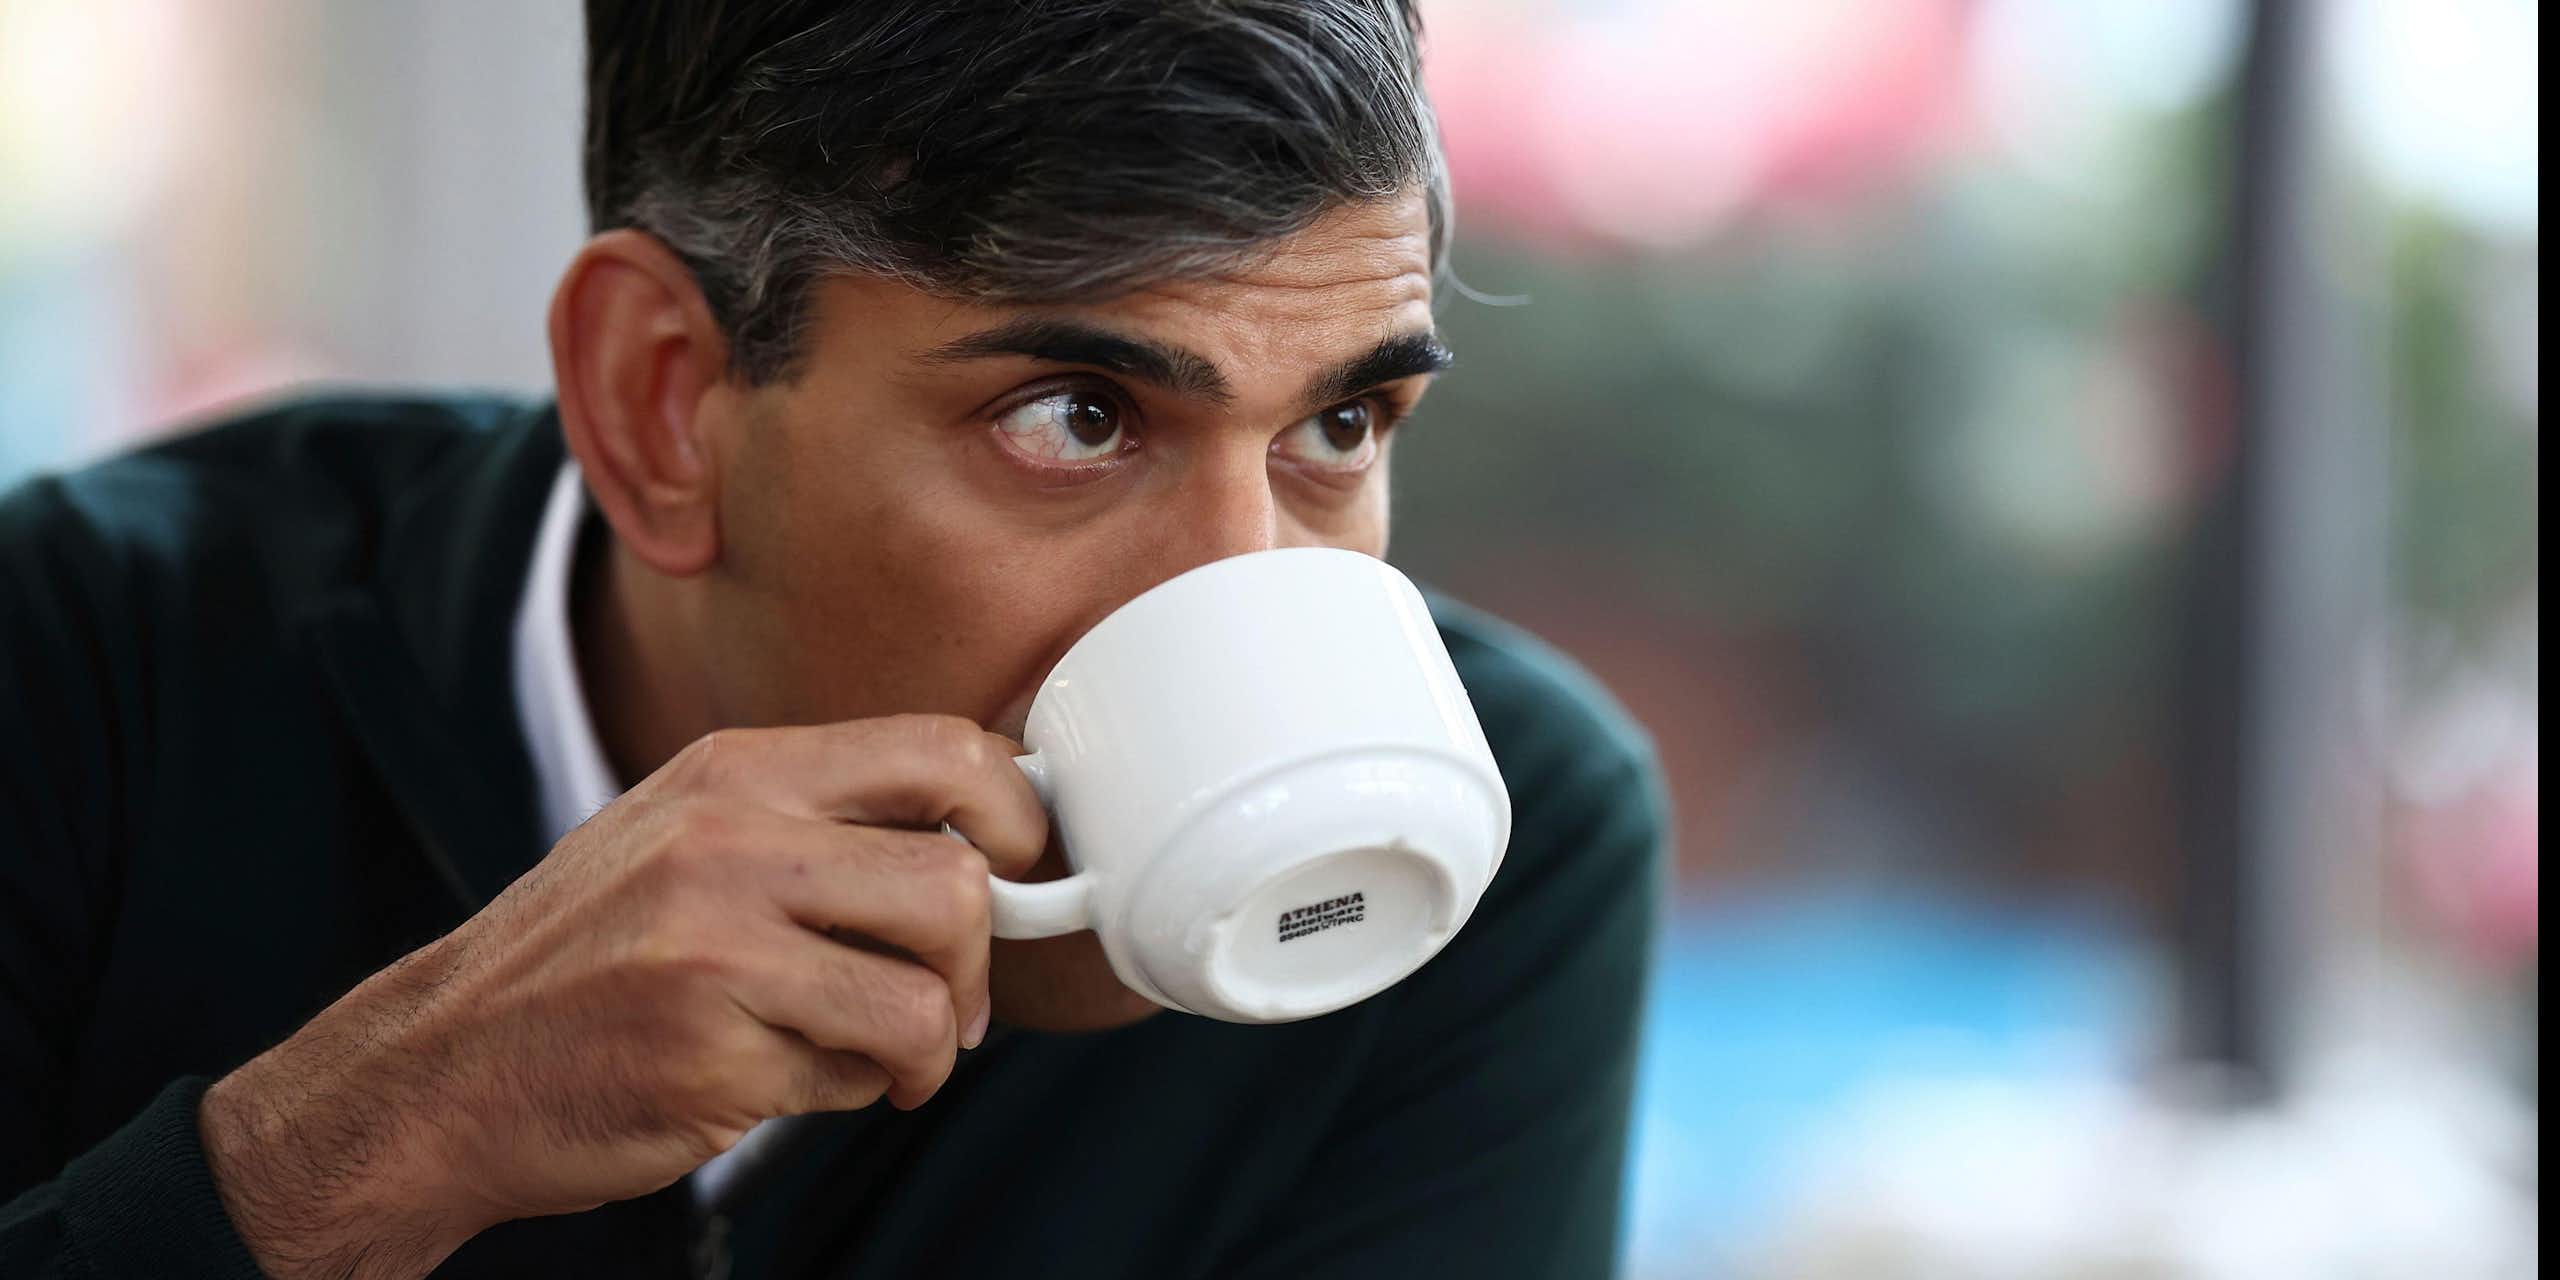 Rishi Sunak drinking from a teacup.